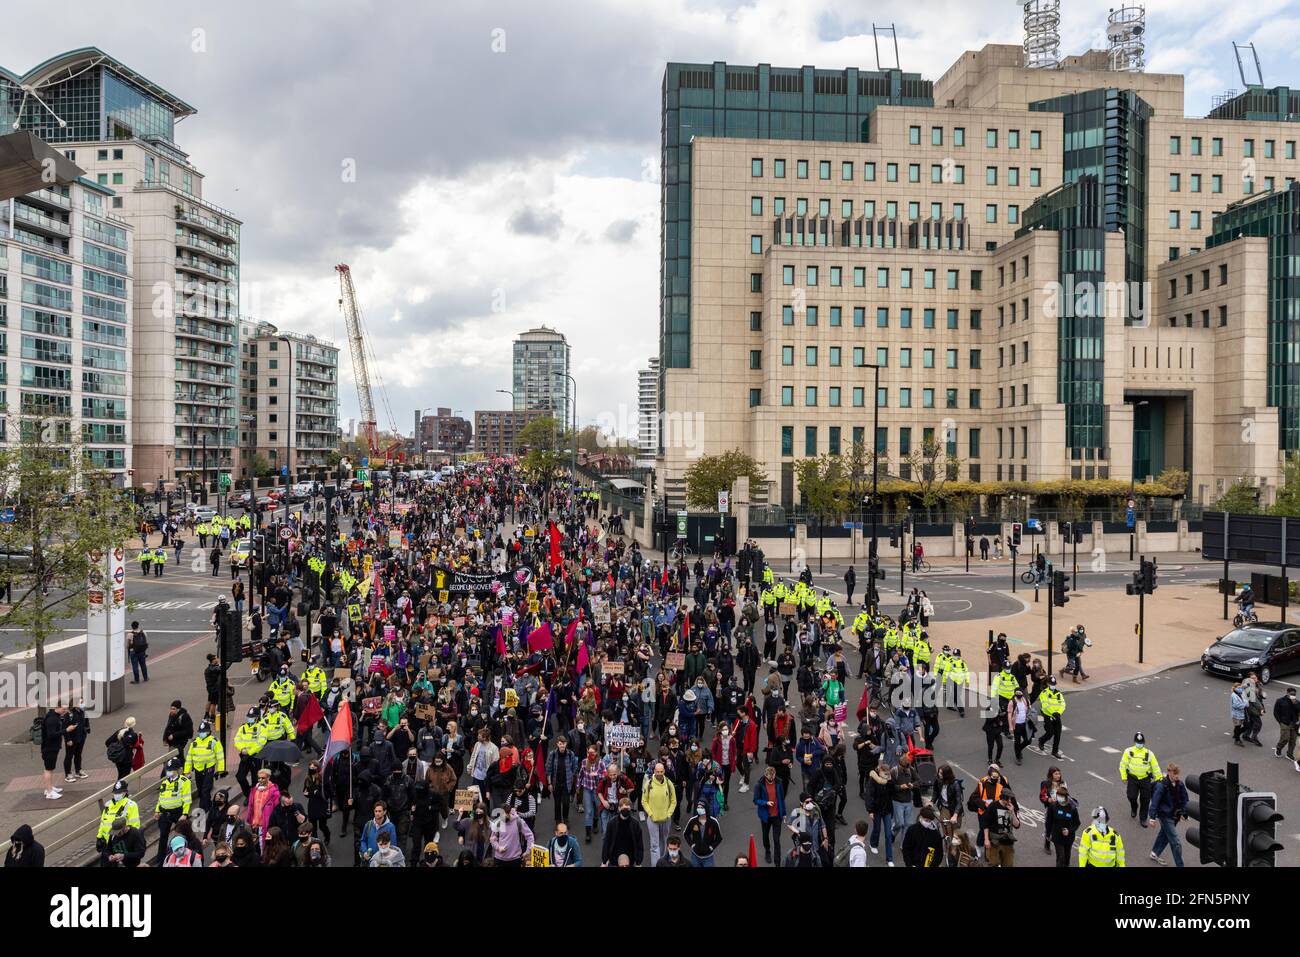 Crowd of protesters march past the MI5 building during a 'Kill the Bill' protest against new policing bill, London, 1 May 2021 Stock Photo